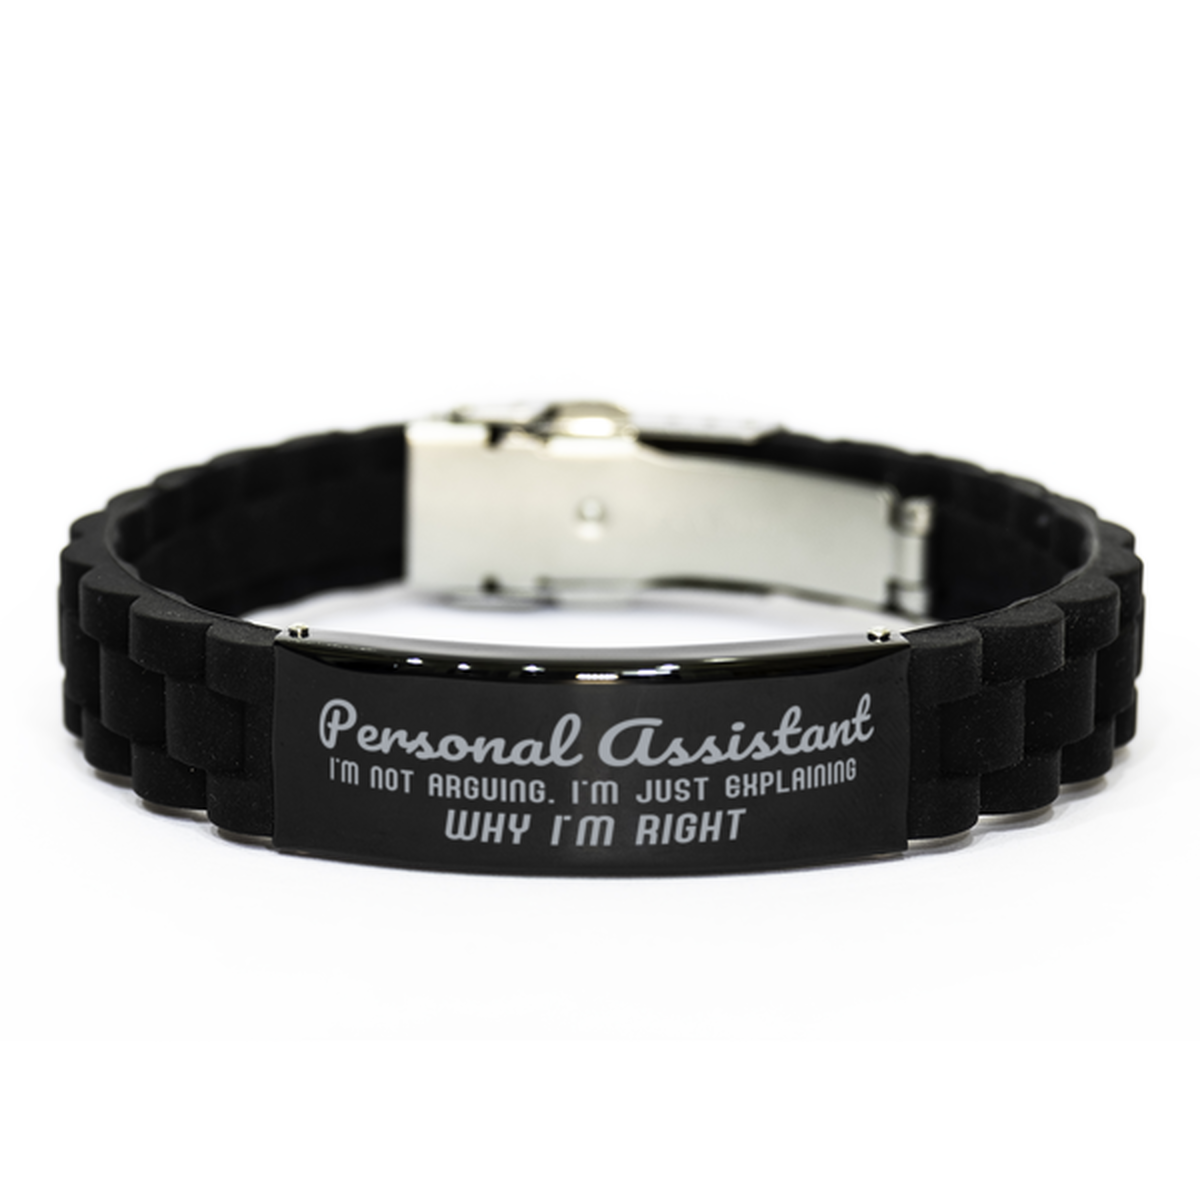 Personal Assistant I'm not Arguing. I'm Just Explaining Why I'm RIGHT Black Glidelock Clasp Bracelet, Funny Saying Quote Personal Assistant Gifts For Personal Assistant Graduation Birthday Christmas Gifts for Men Women Coworker